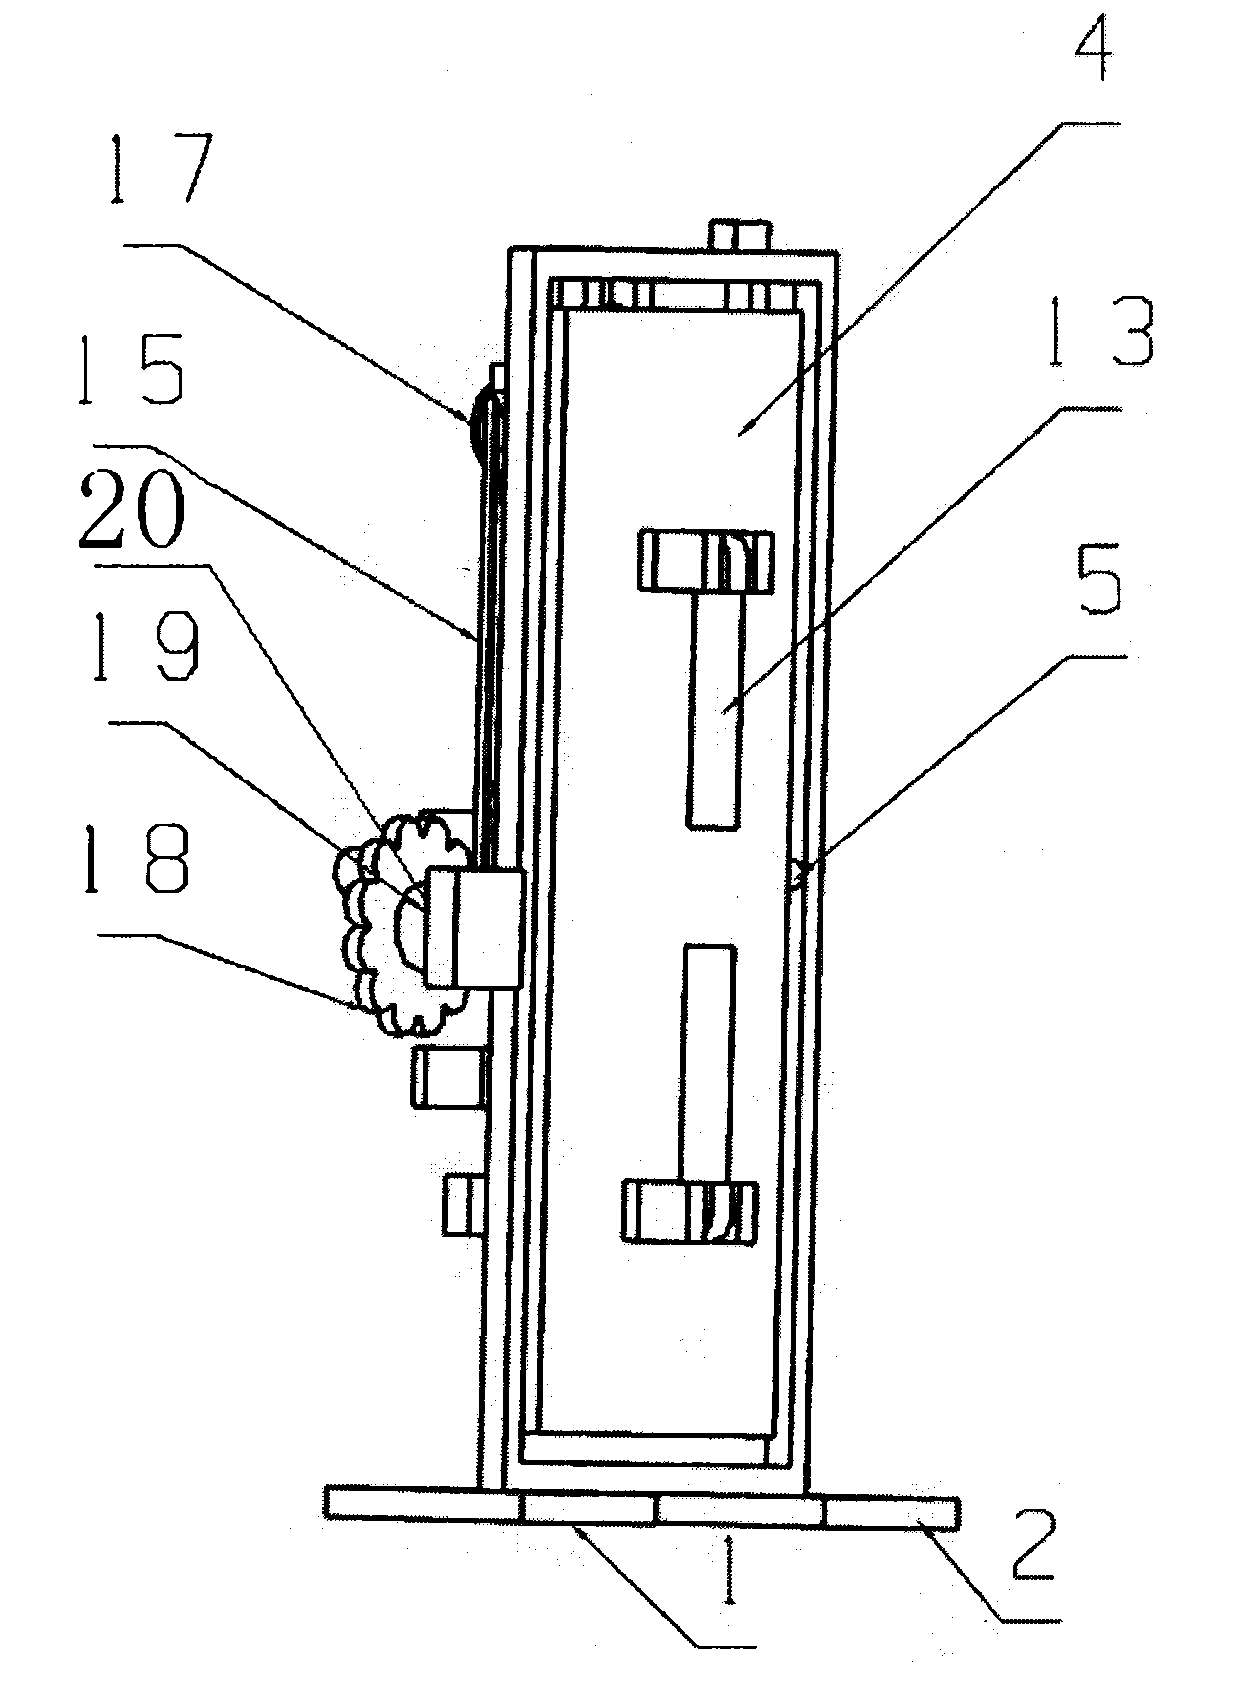 Spinal disease prevention and rehabilitation device